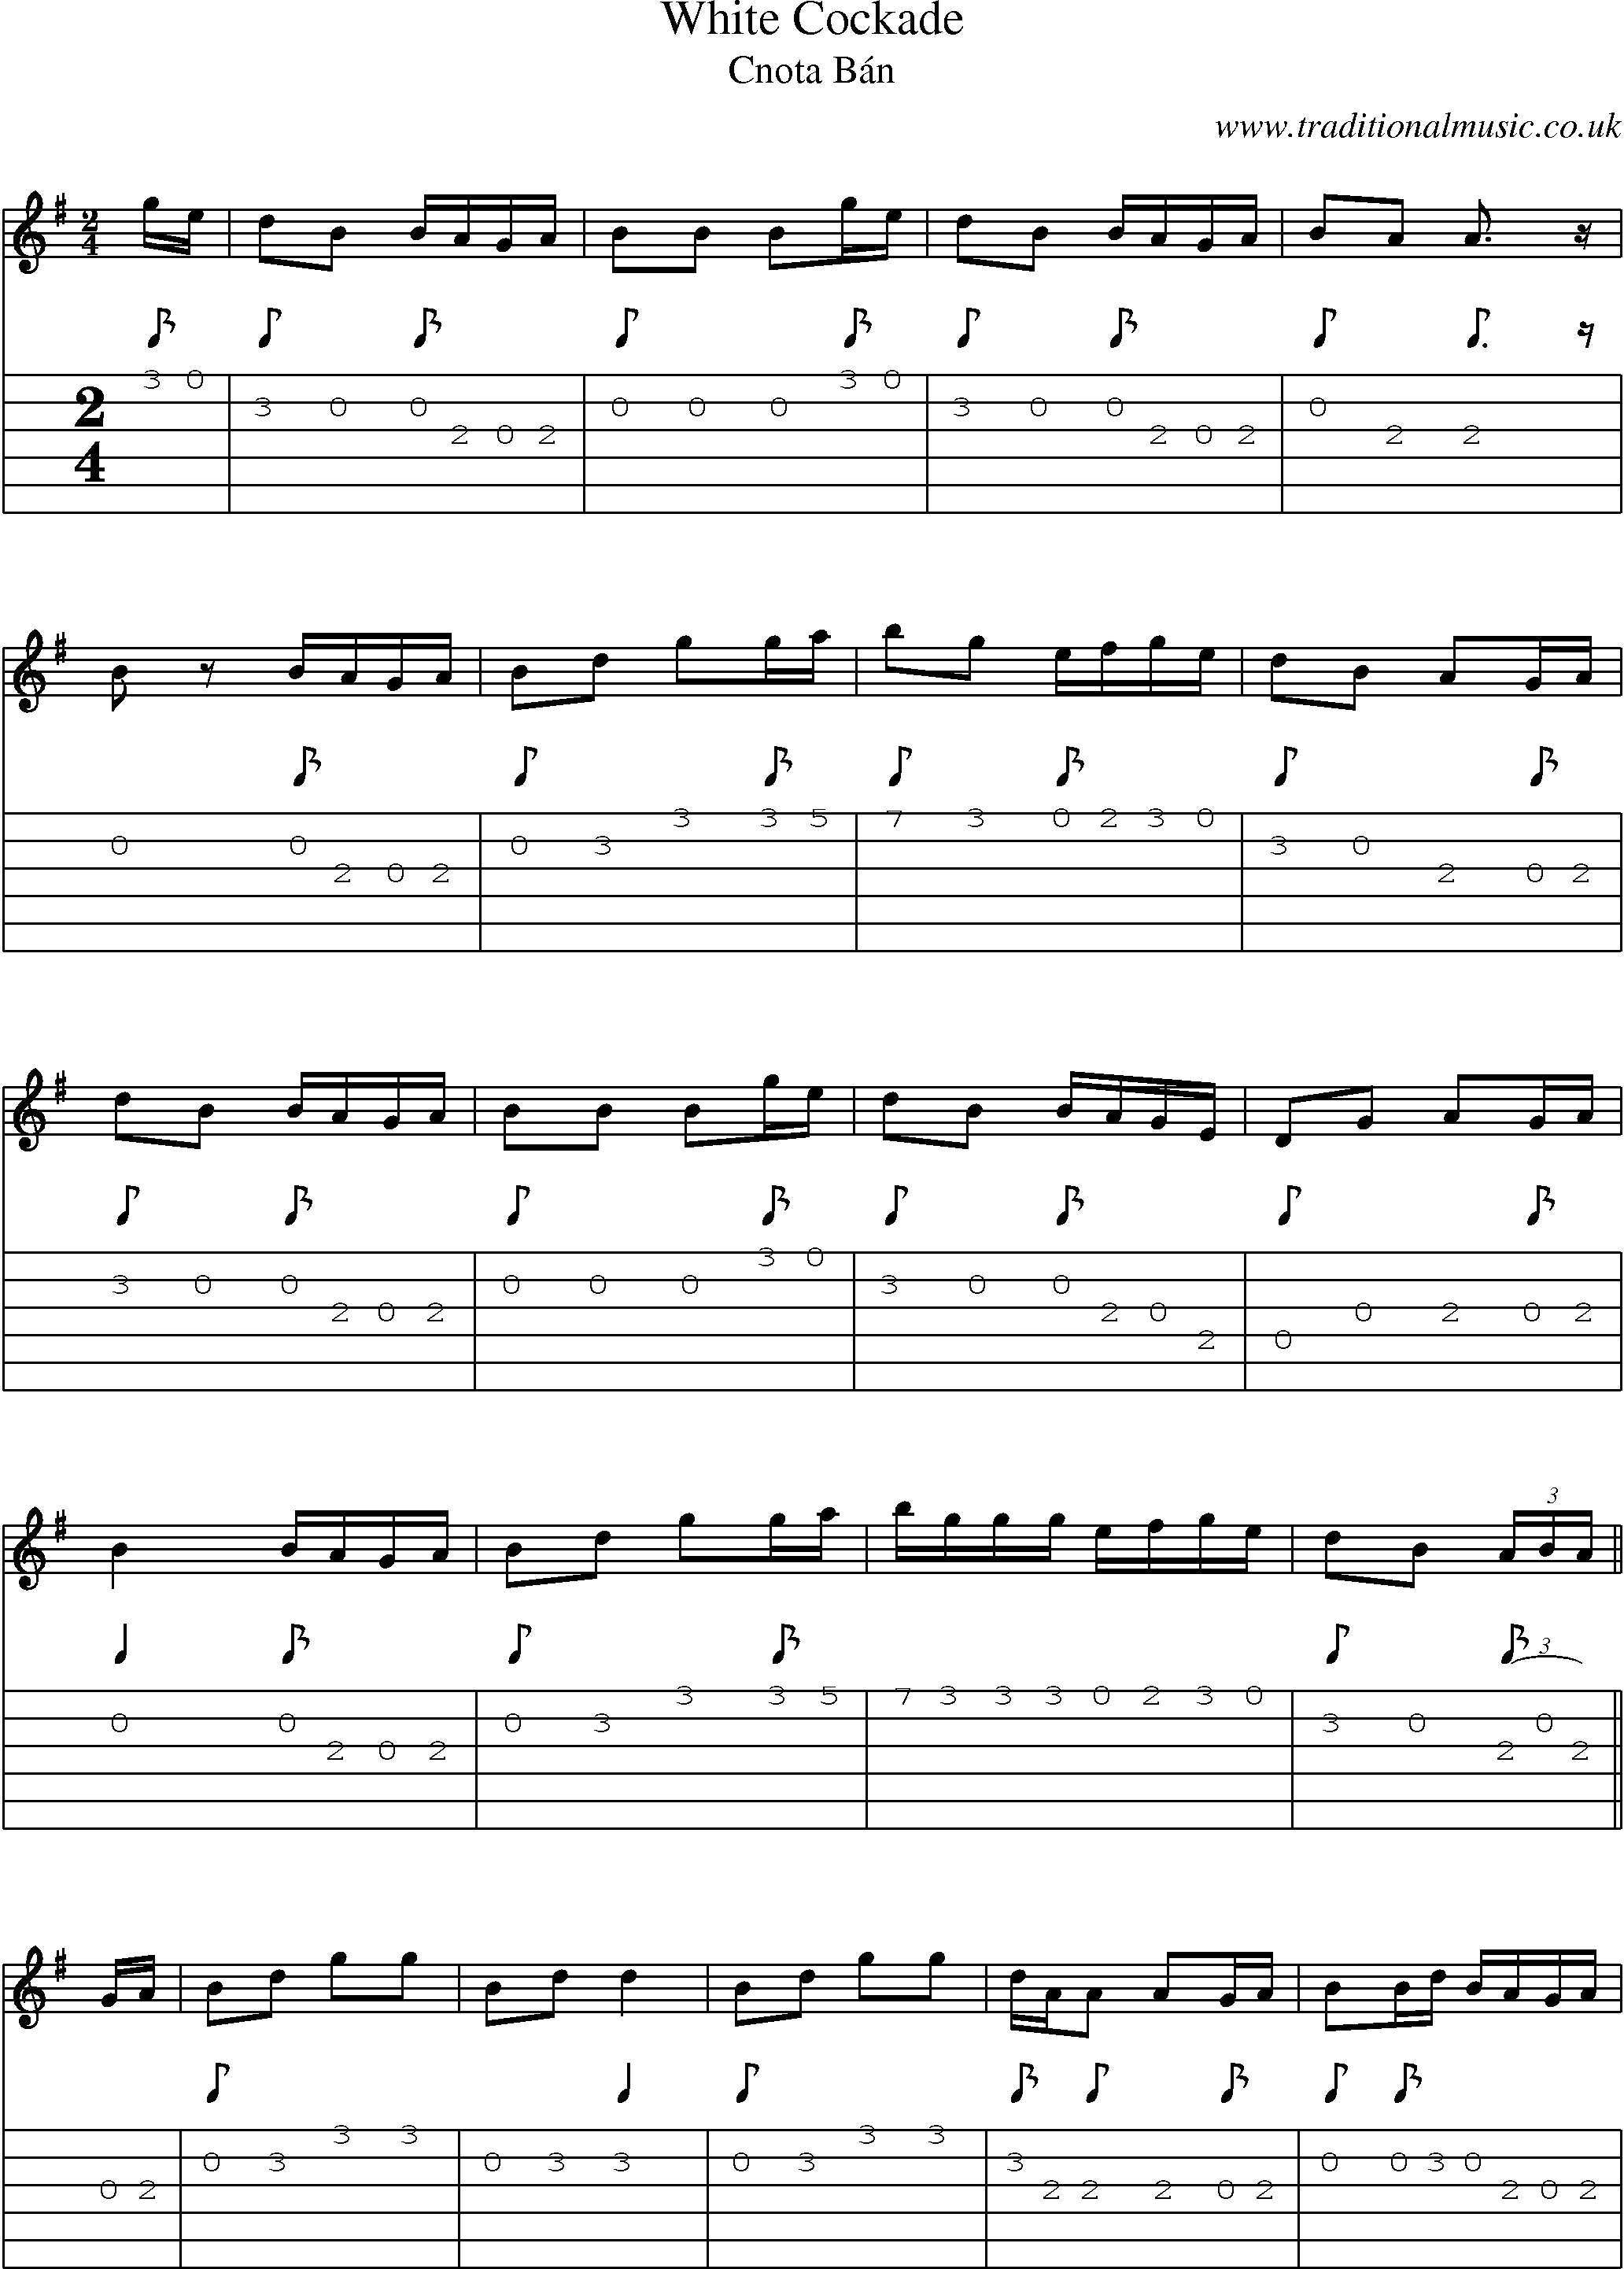 Music Score and Guitar Tabs for White Cockade